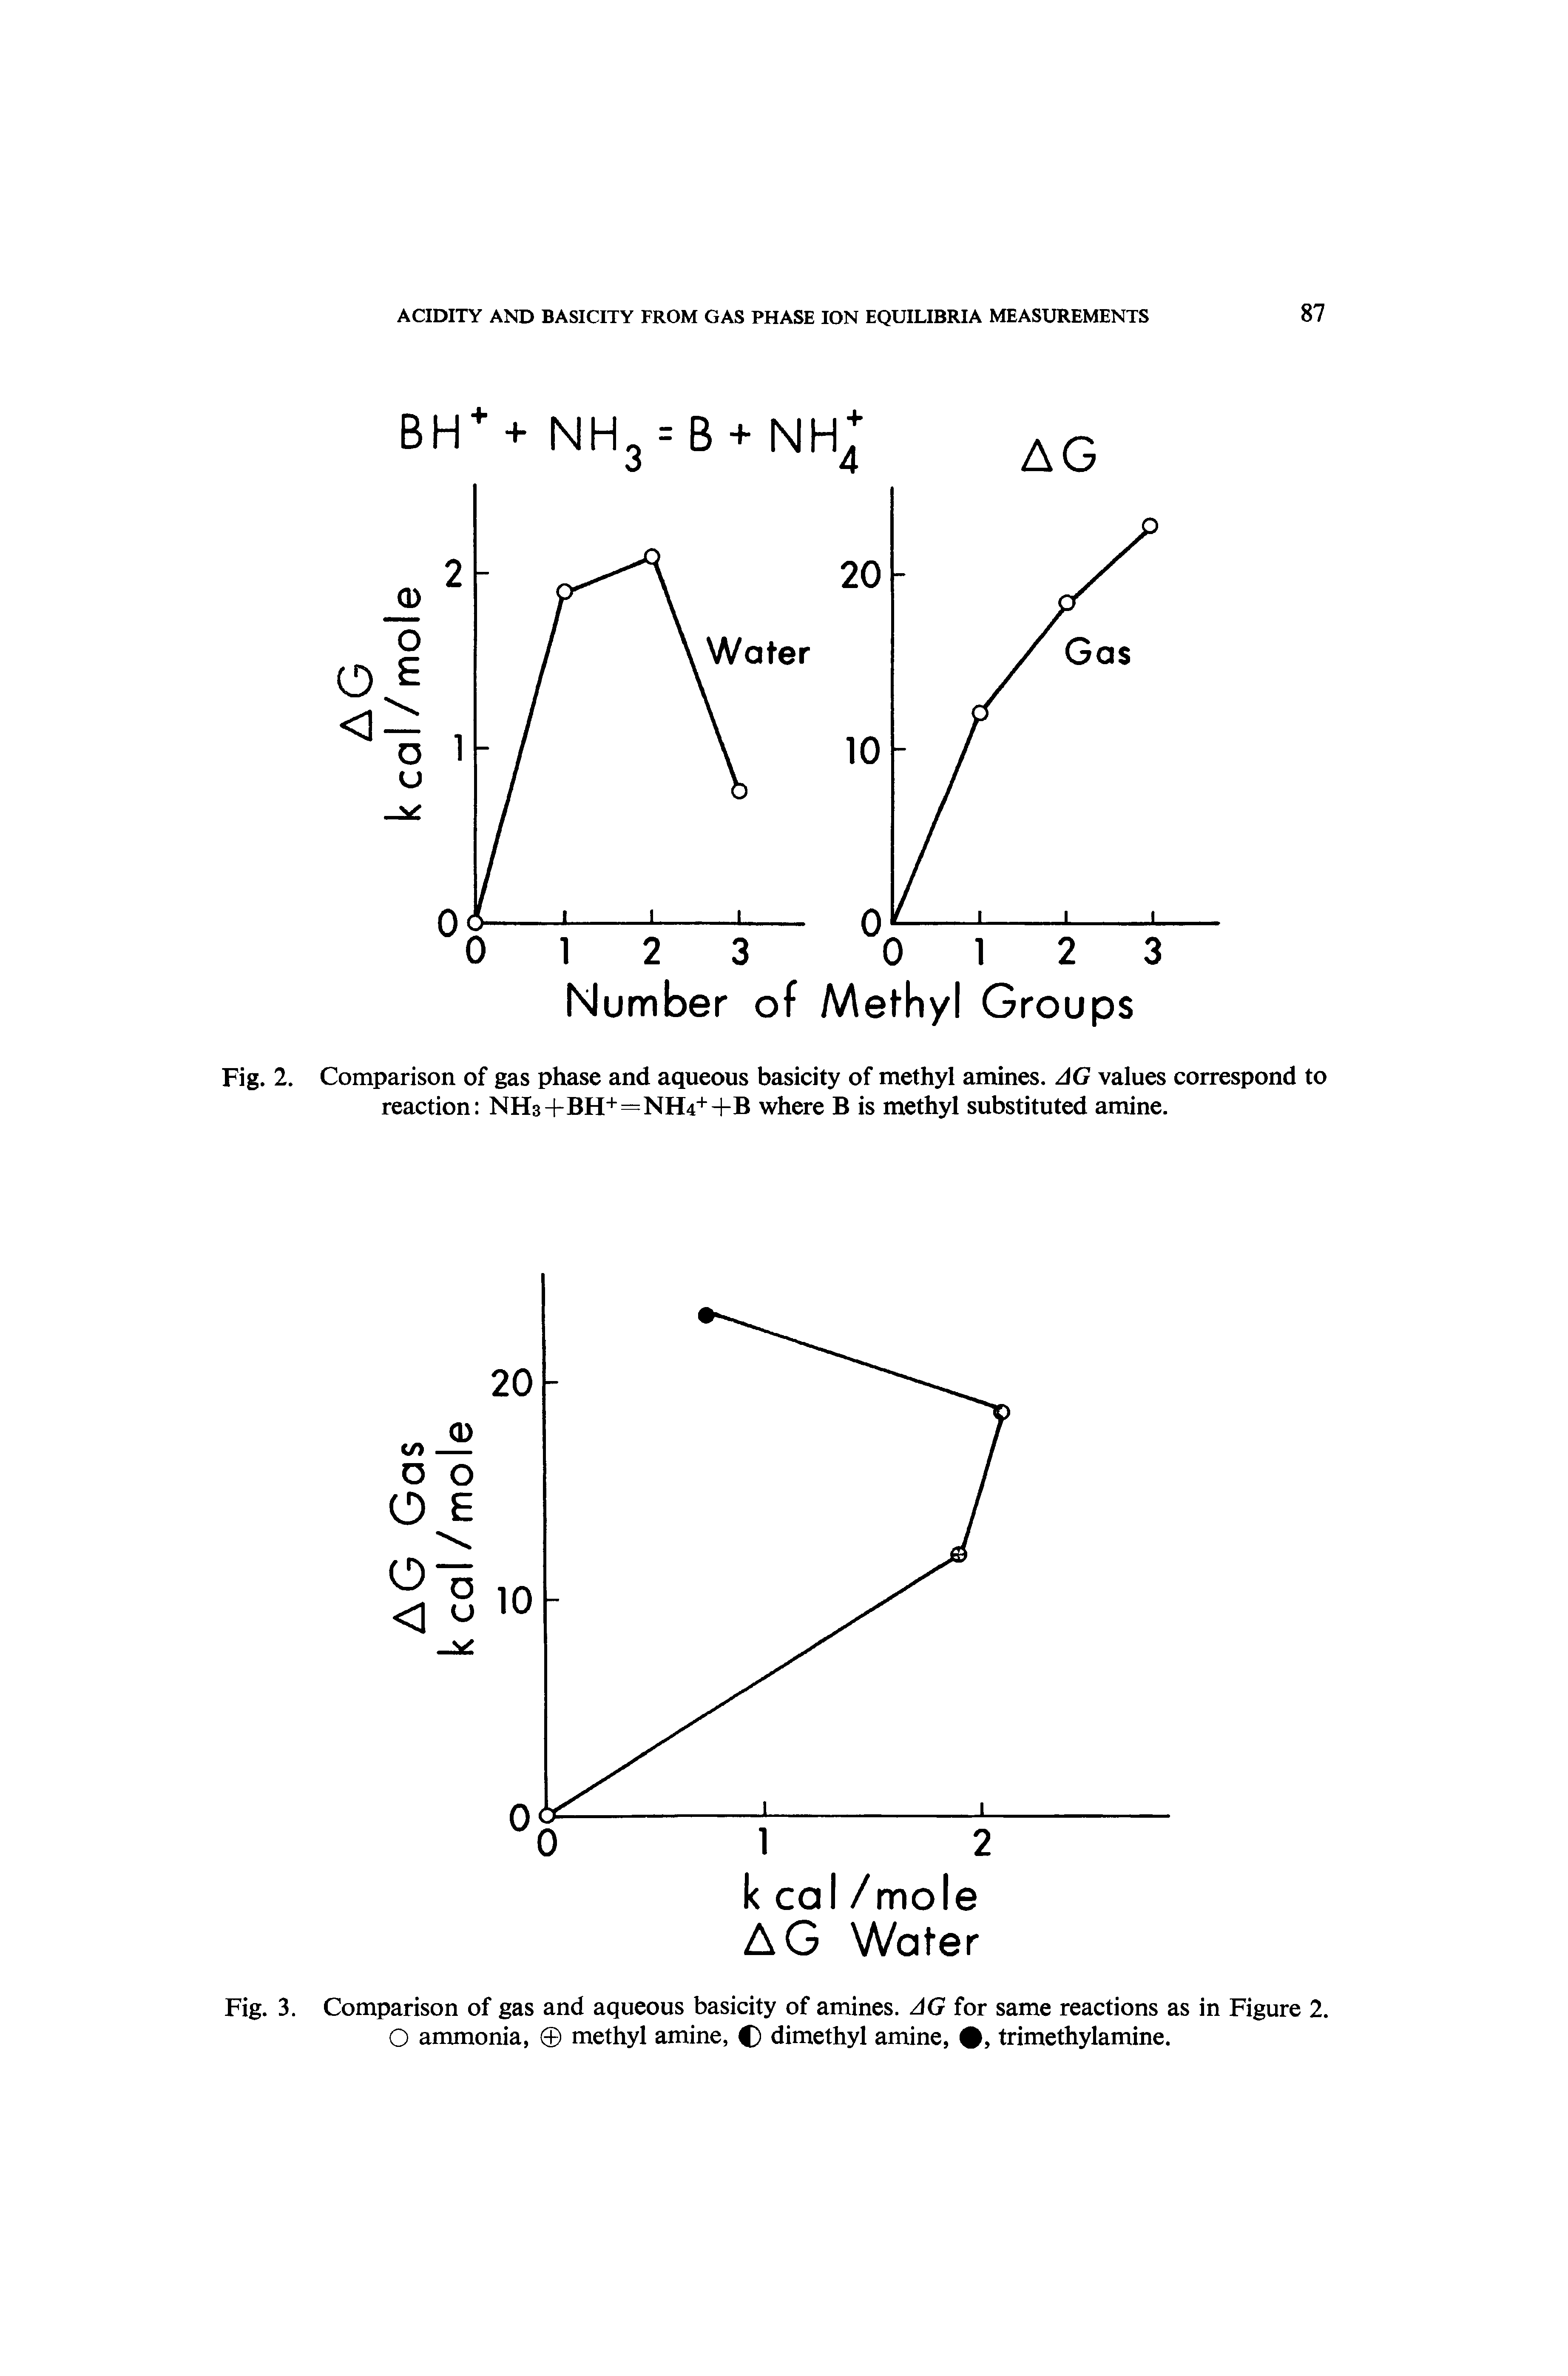 Fig. 3. Comparison of gas and aqueous basicity of amines. AG for same reactions as in Figure 2. O ammonia, methyl amine, C dimethyl amine,, trimethylamine.